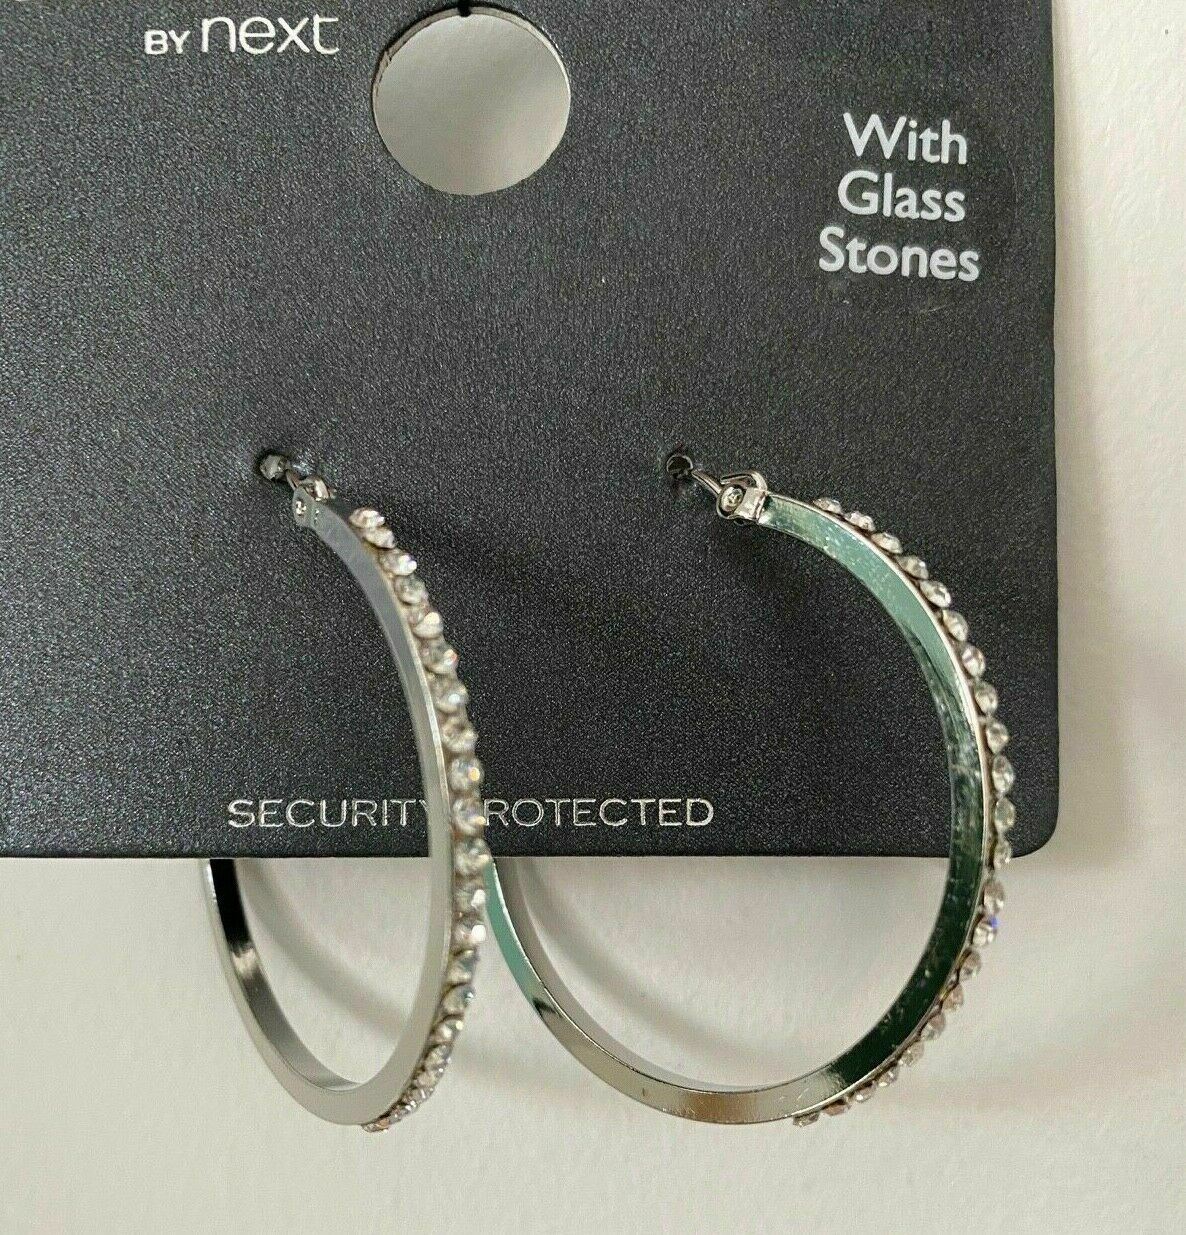 Accessories by Next Silver Plated Hoop Earrings With Glass Stones